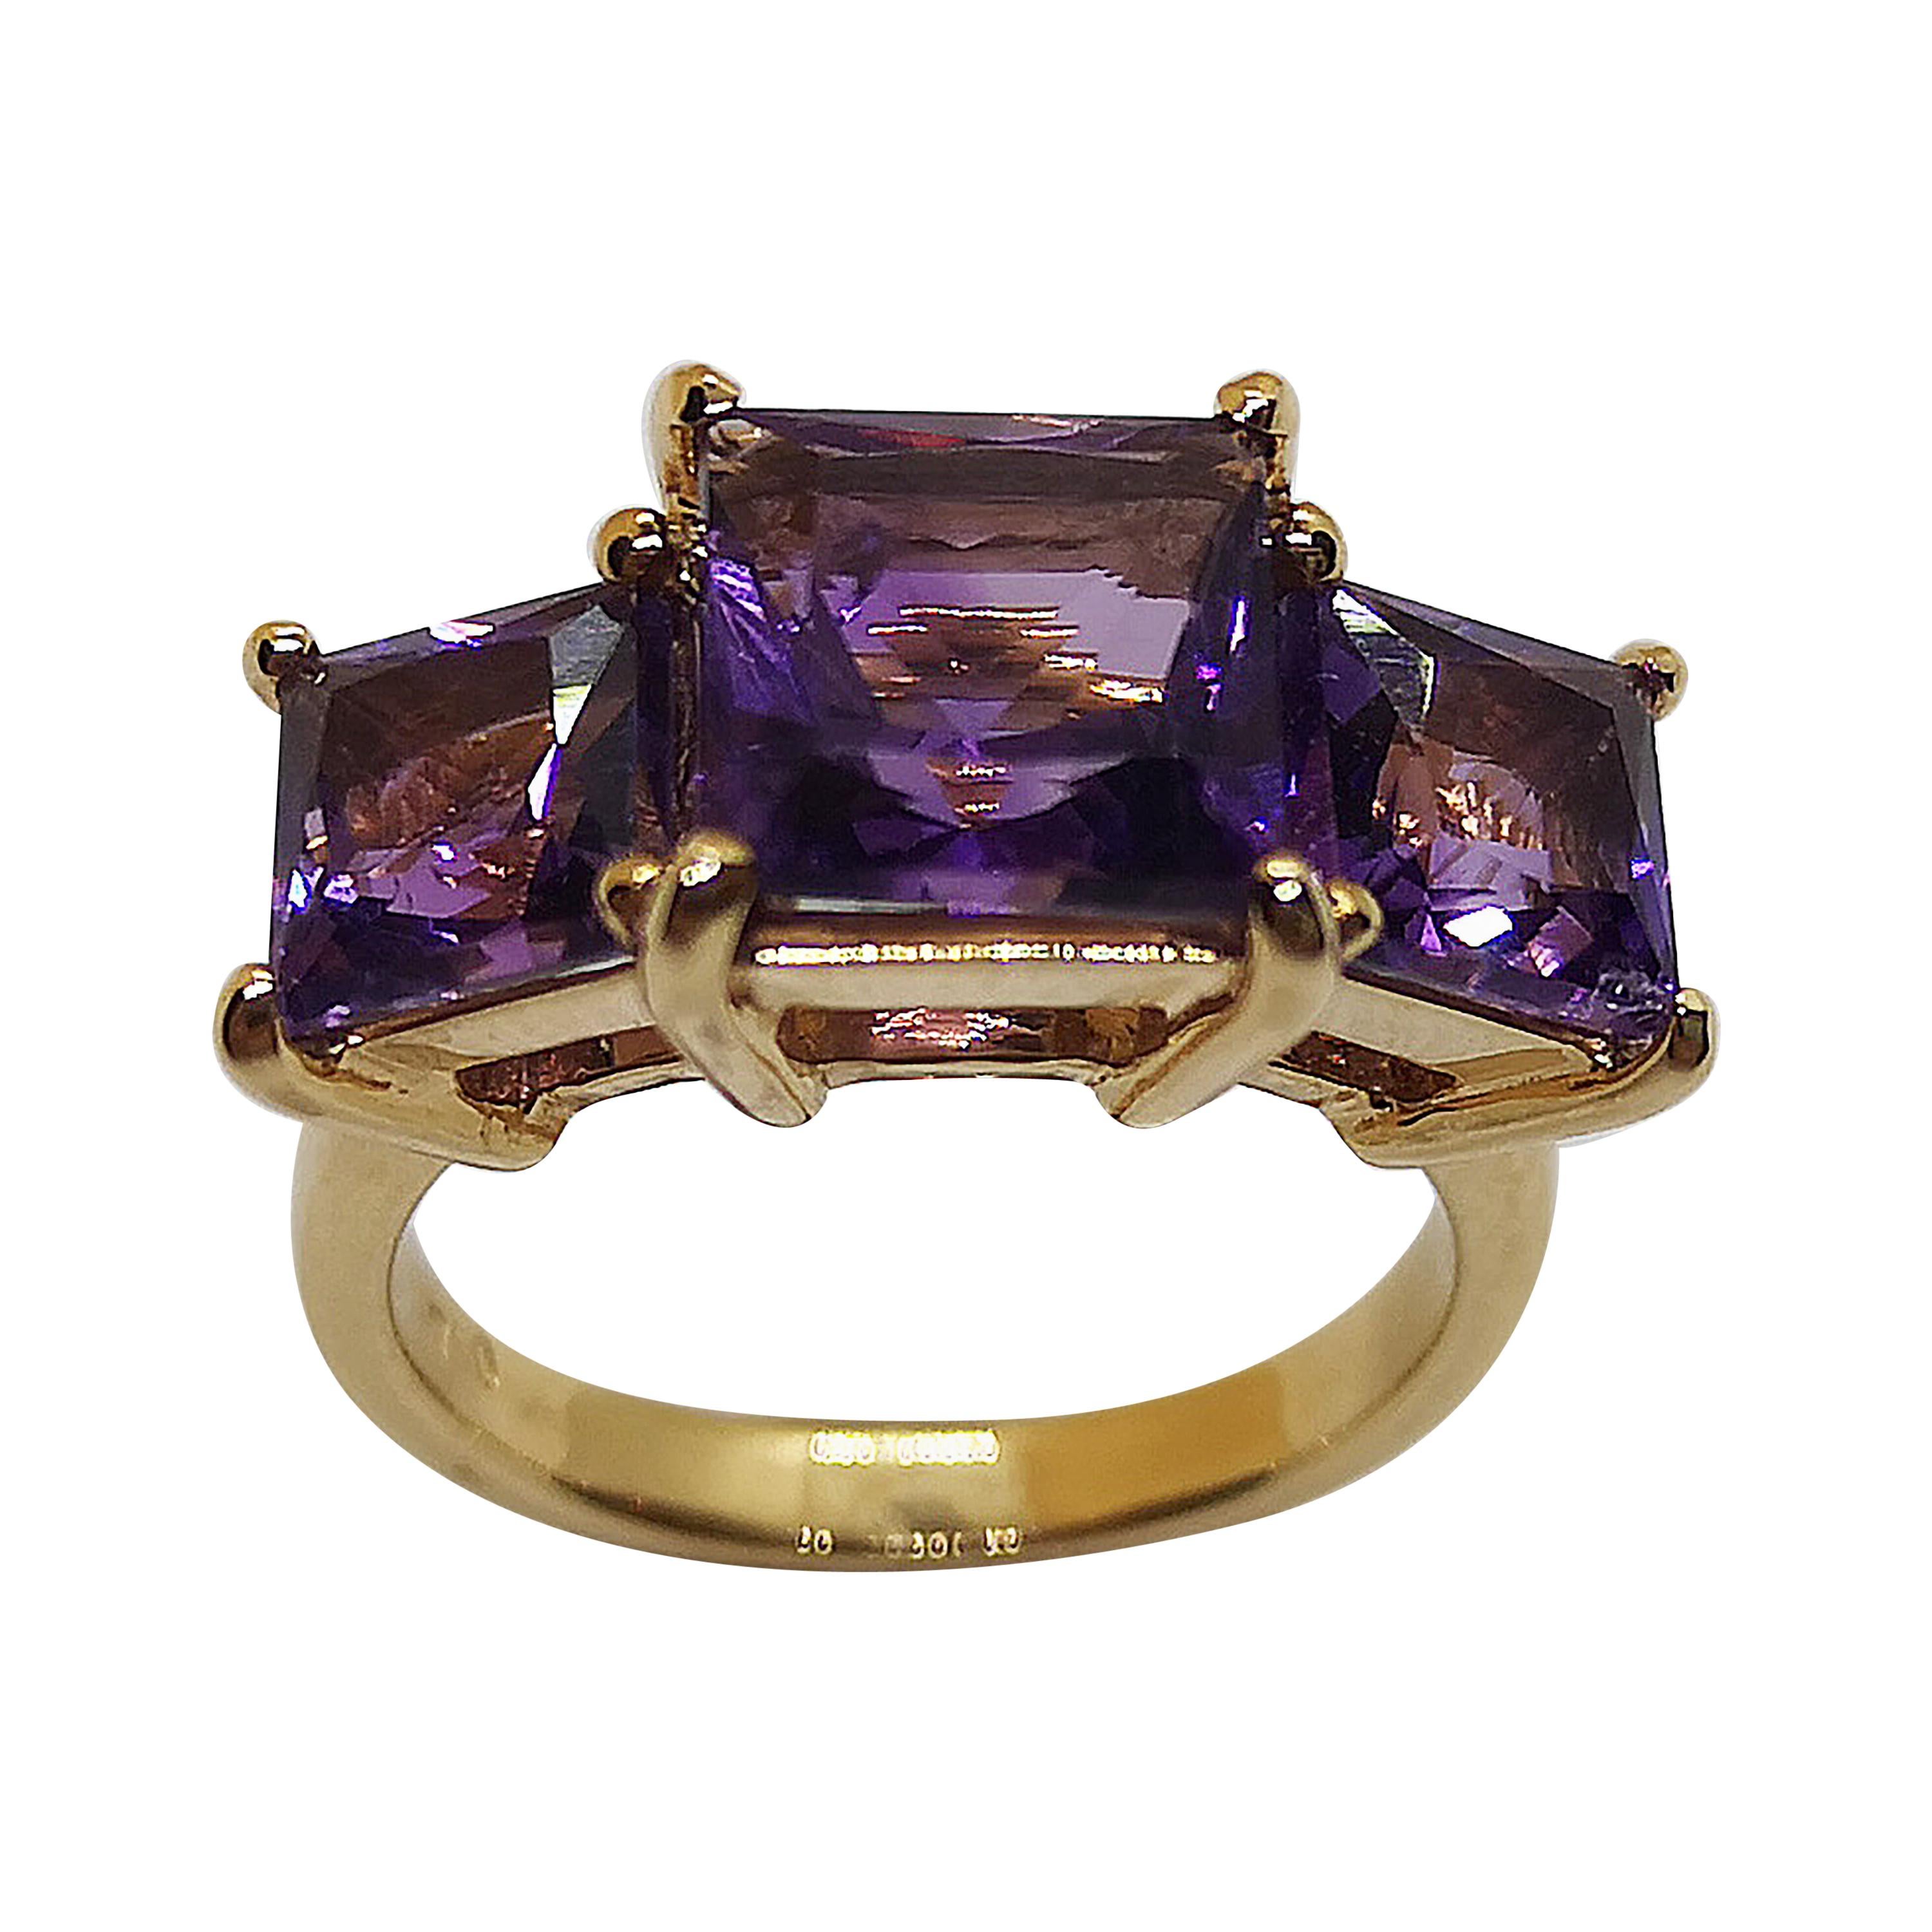 GENUINE AMETHYST 925 SILVER ART DECO ANTIQUE STYLE 3 STONE RING SIZE 10     #193 